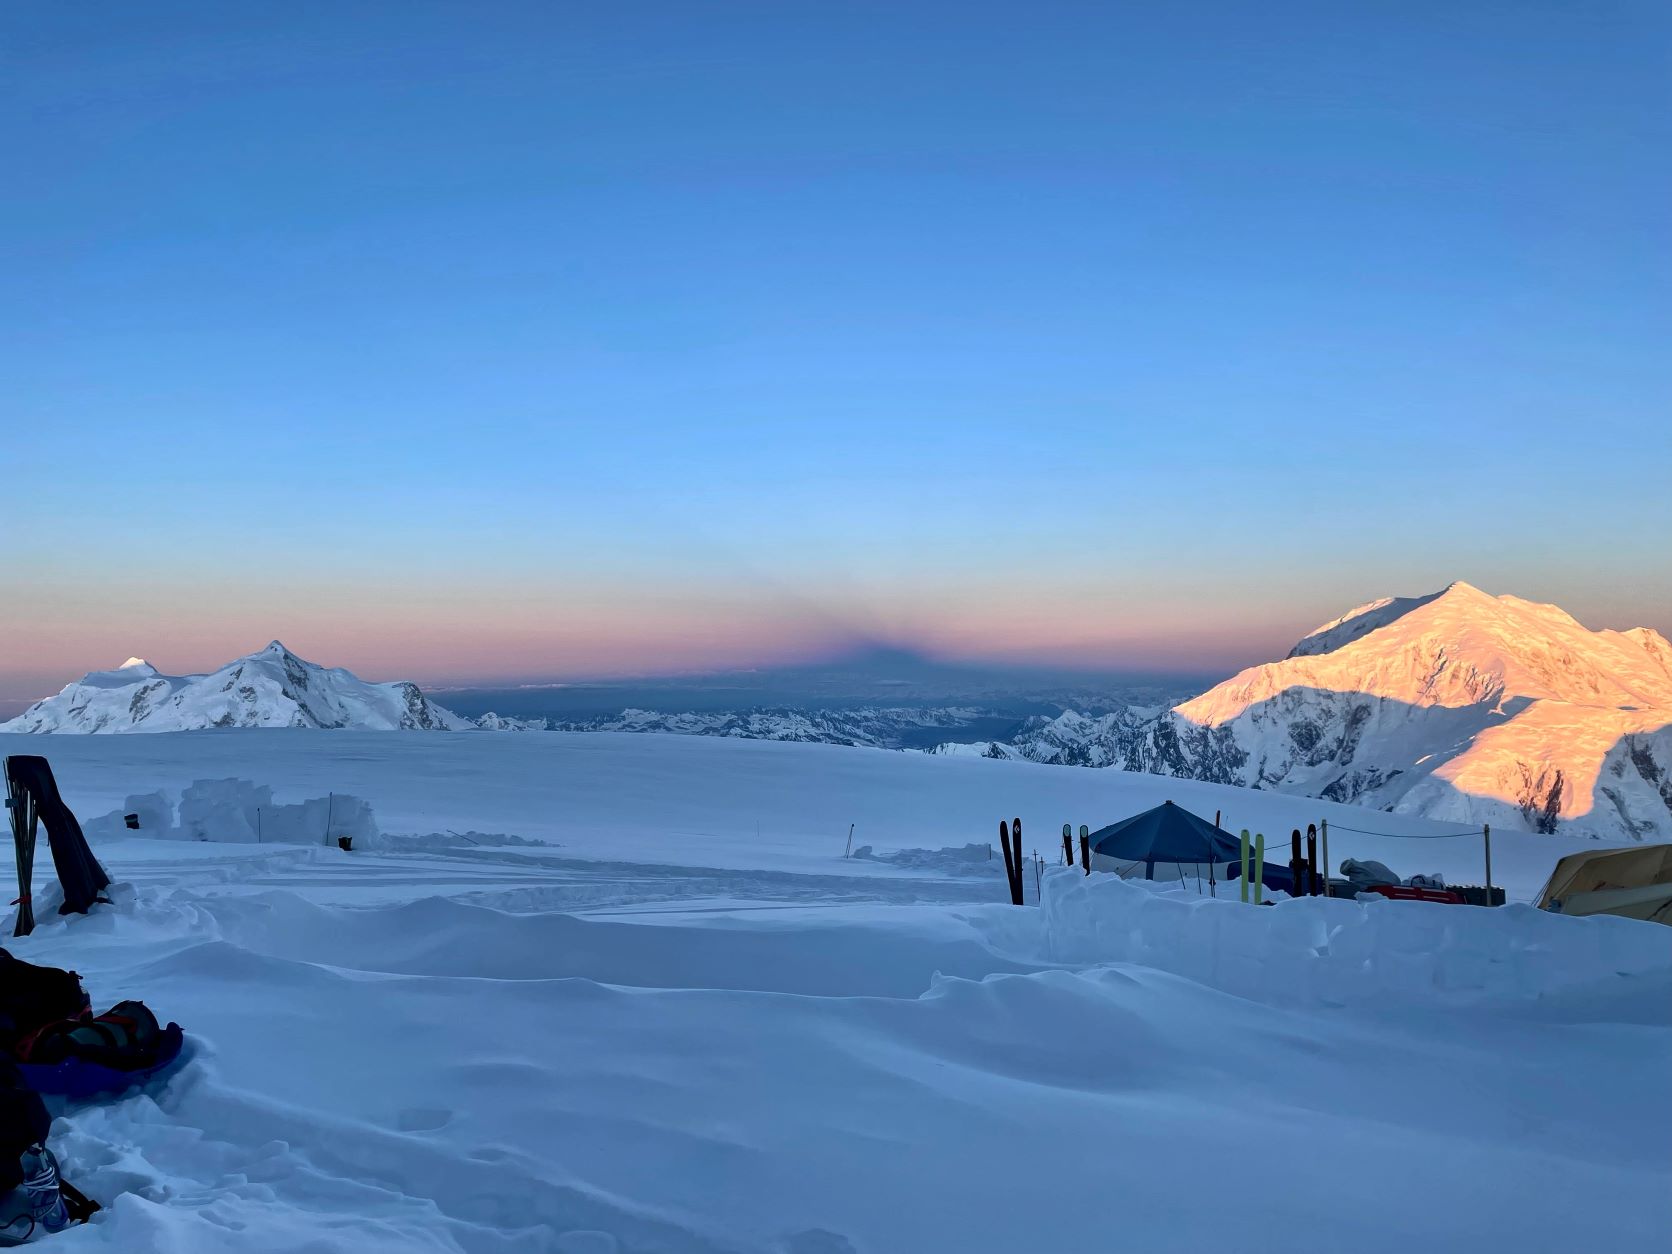 A camp in shadow peers out at an alpenglow peak